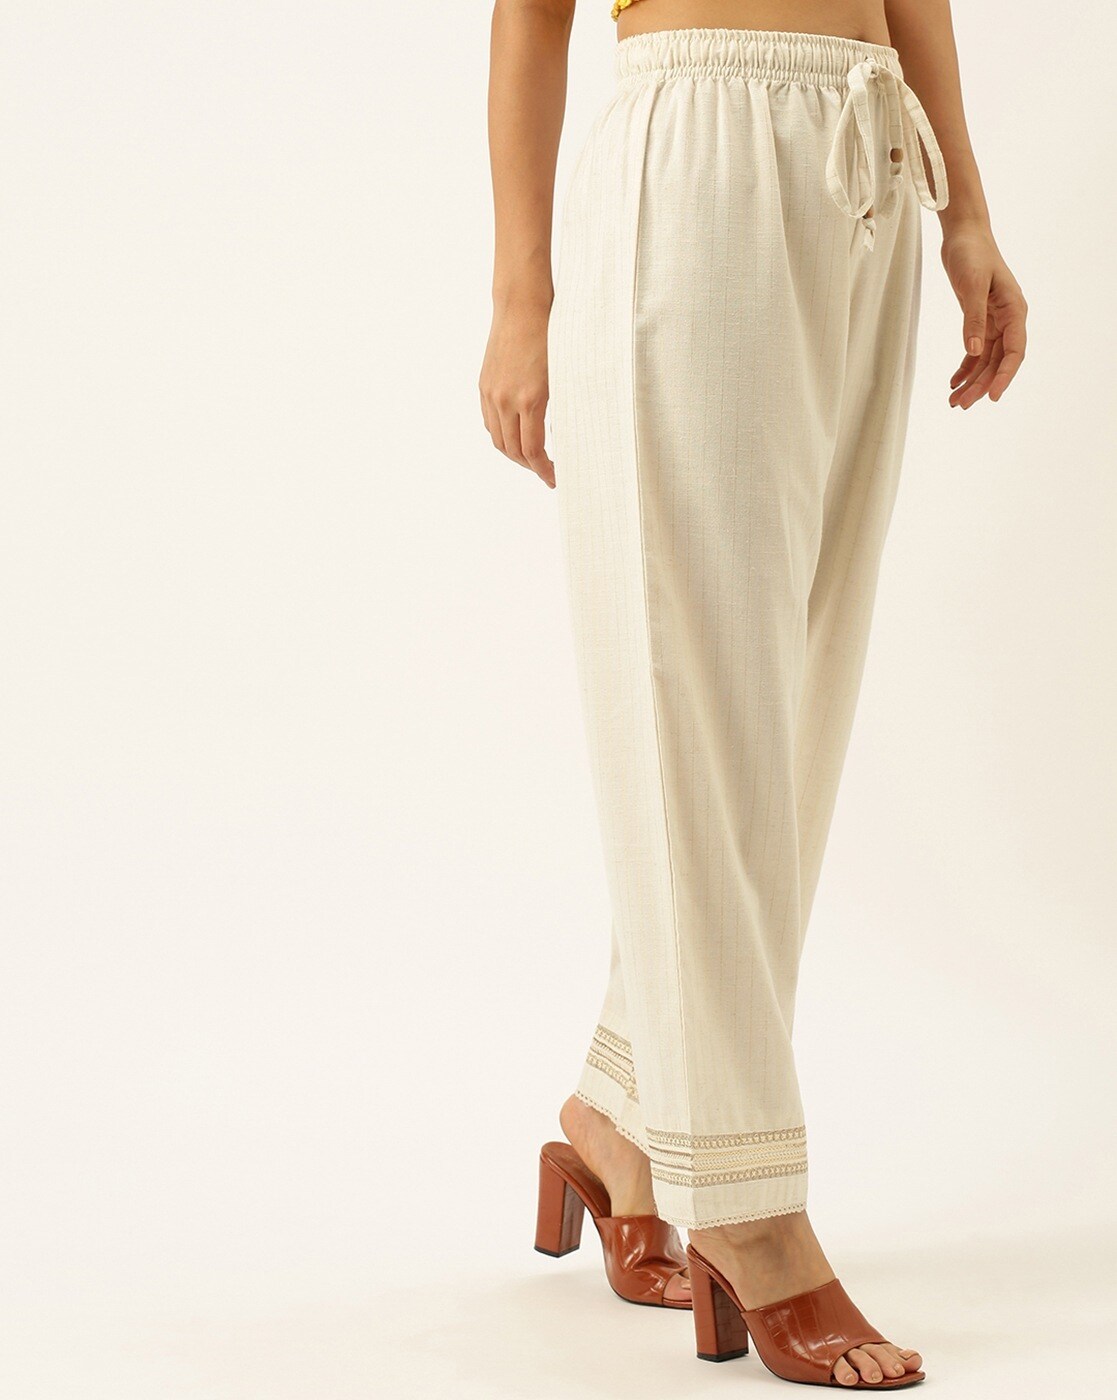 Cotton Fabric Cream Solid Ankle Length Pant For Women - Zola